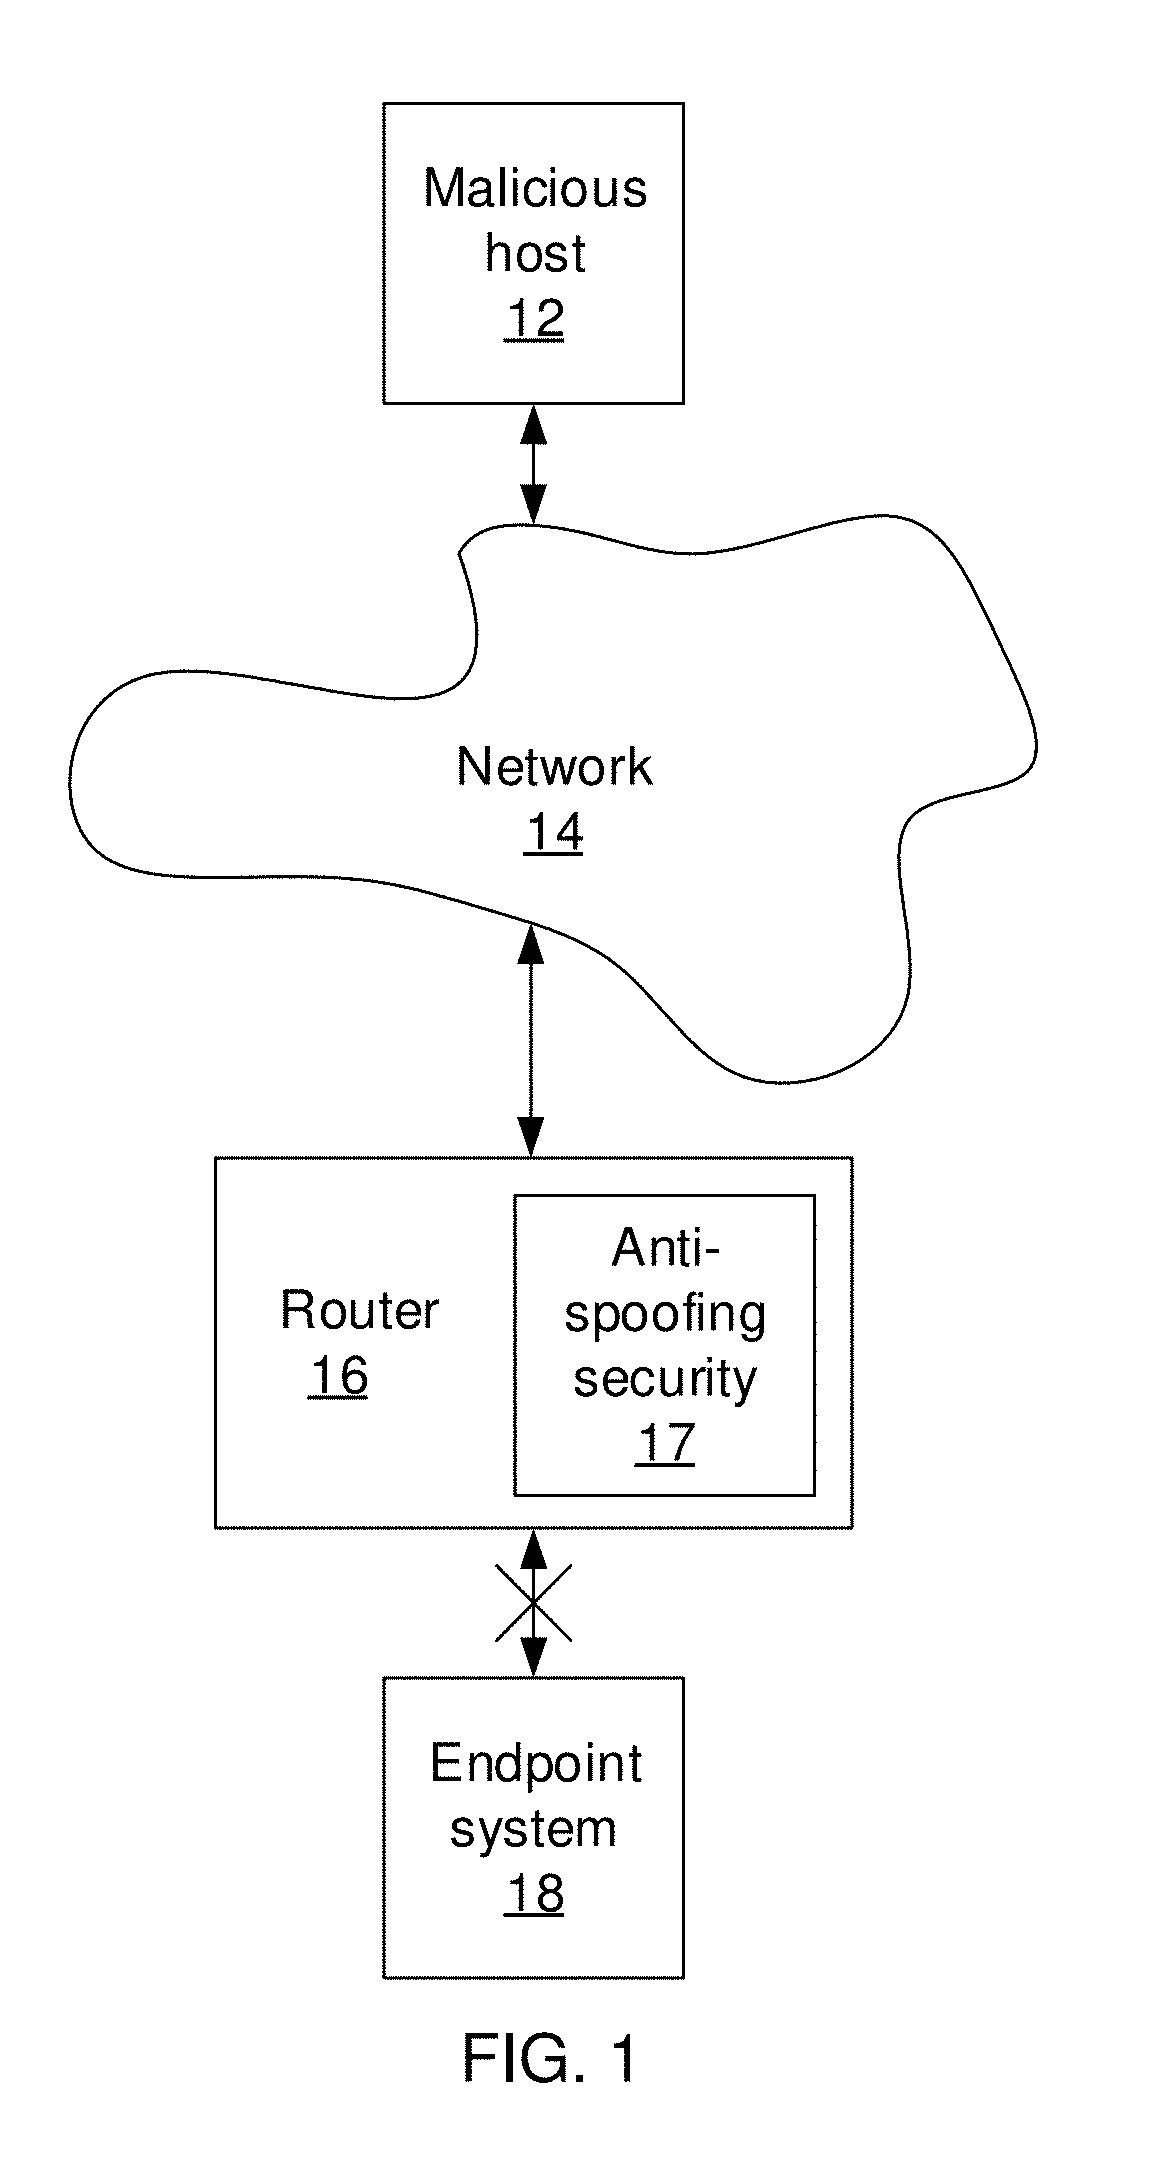 Network gateway spoofing detection and mitigation